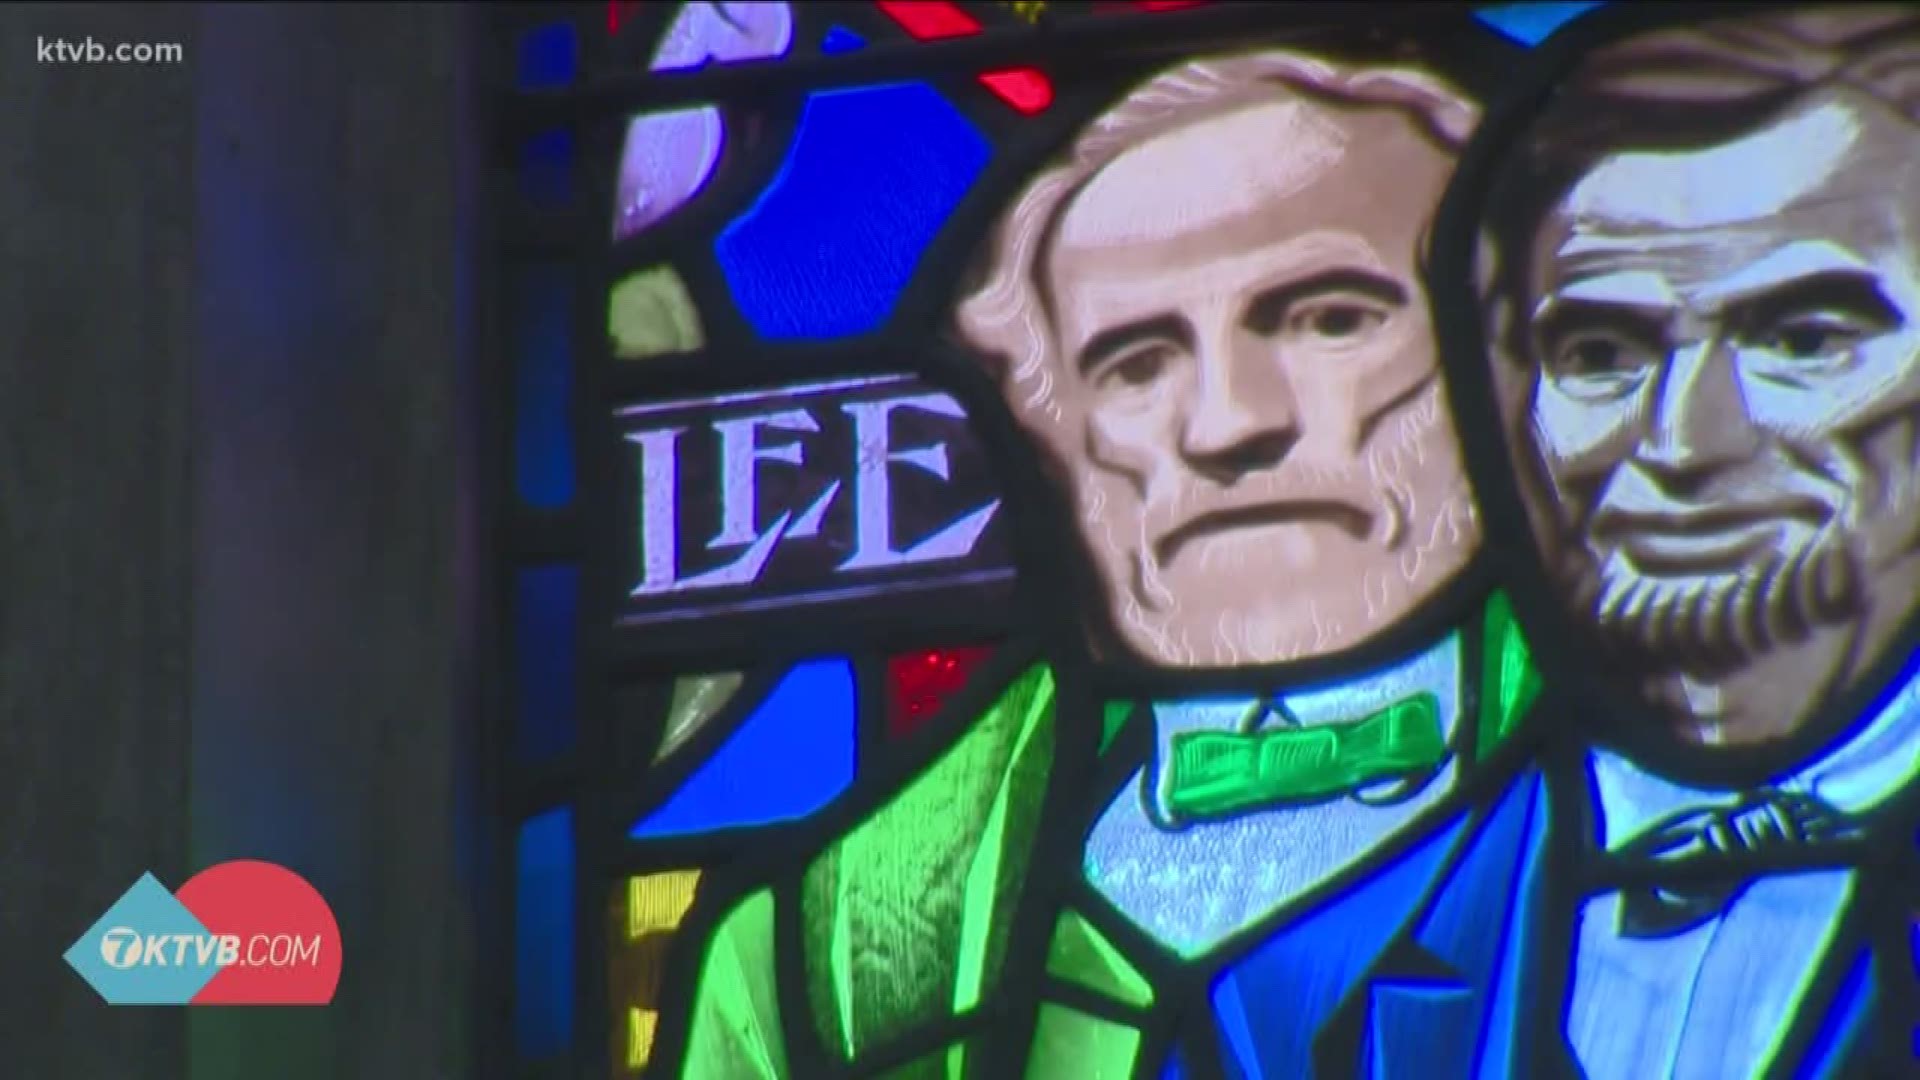 Plans are in the works to remove a stained-glass image from inside the Cathedral of the Rockies. It depicts the image of Confederate leader Robert E. Lee.